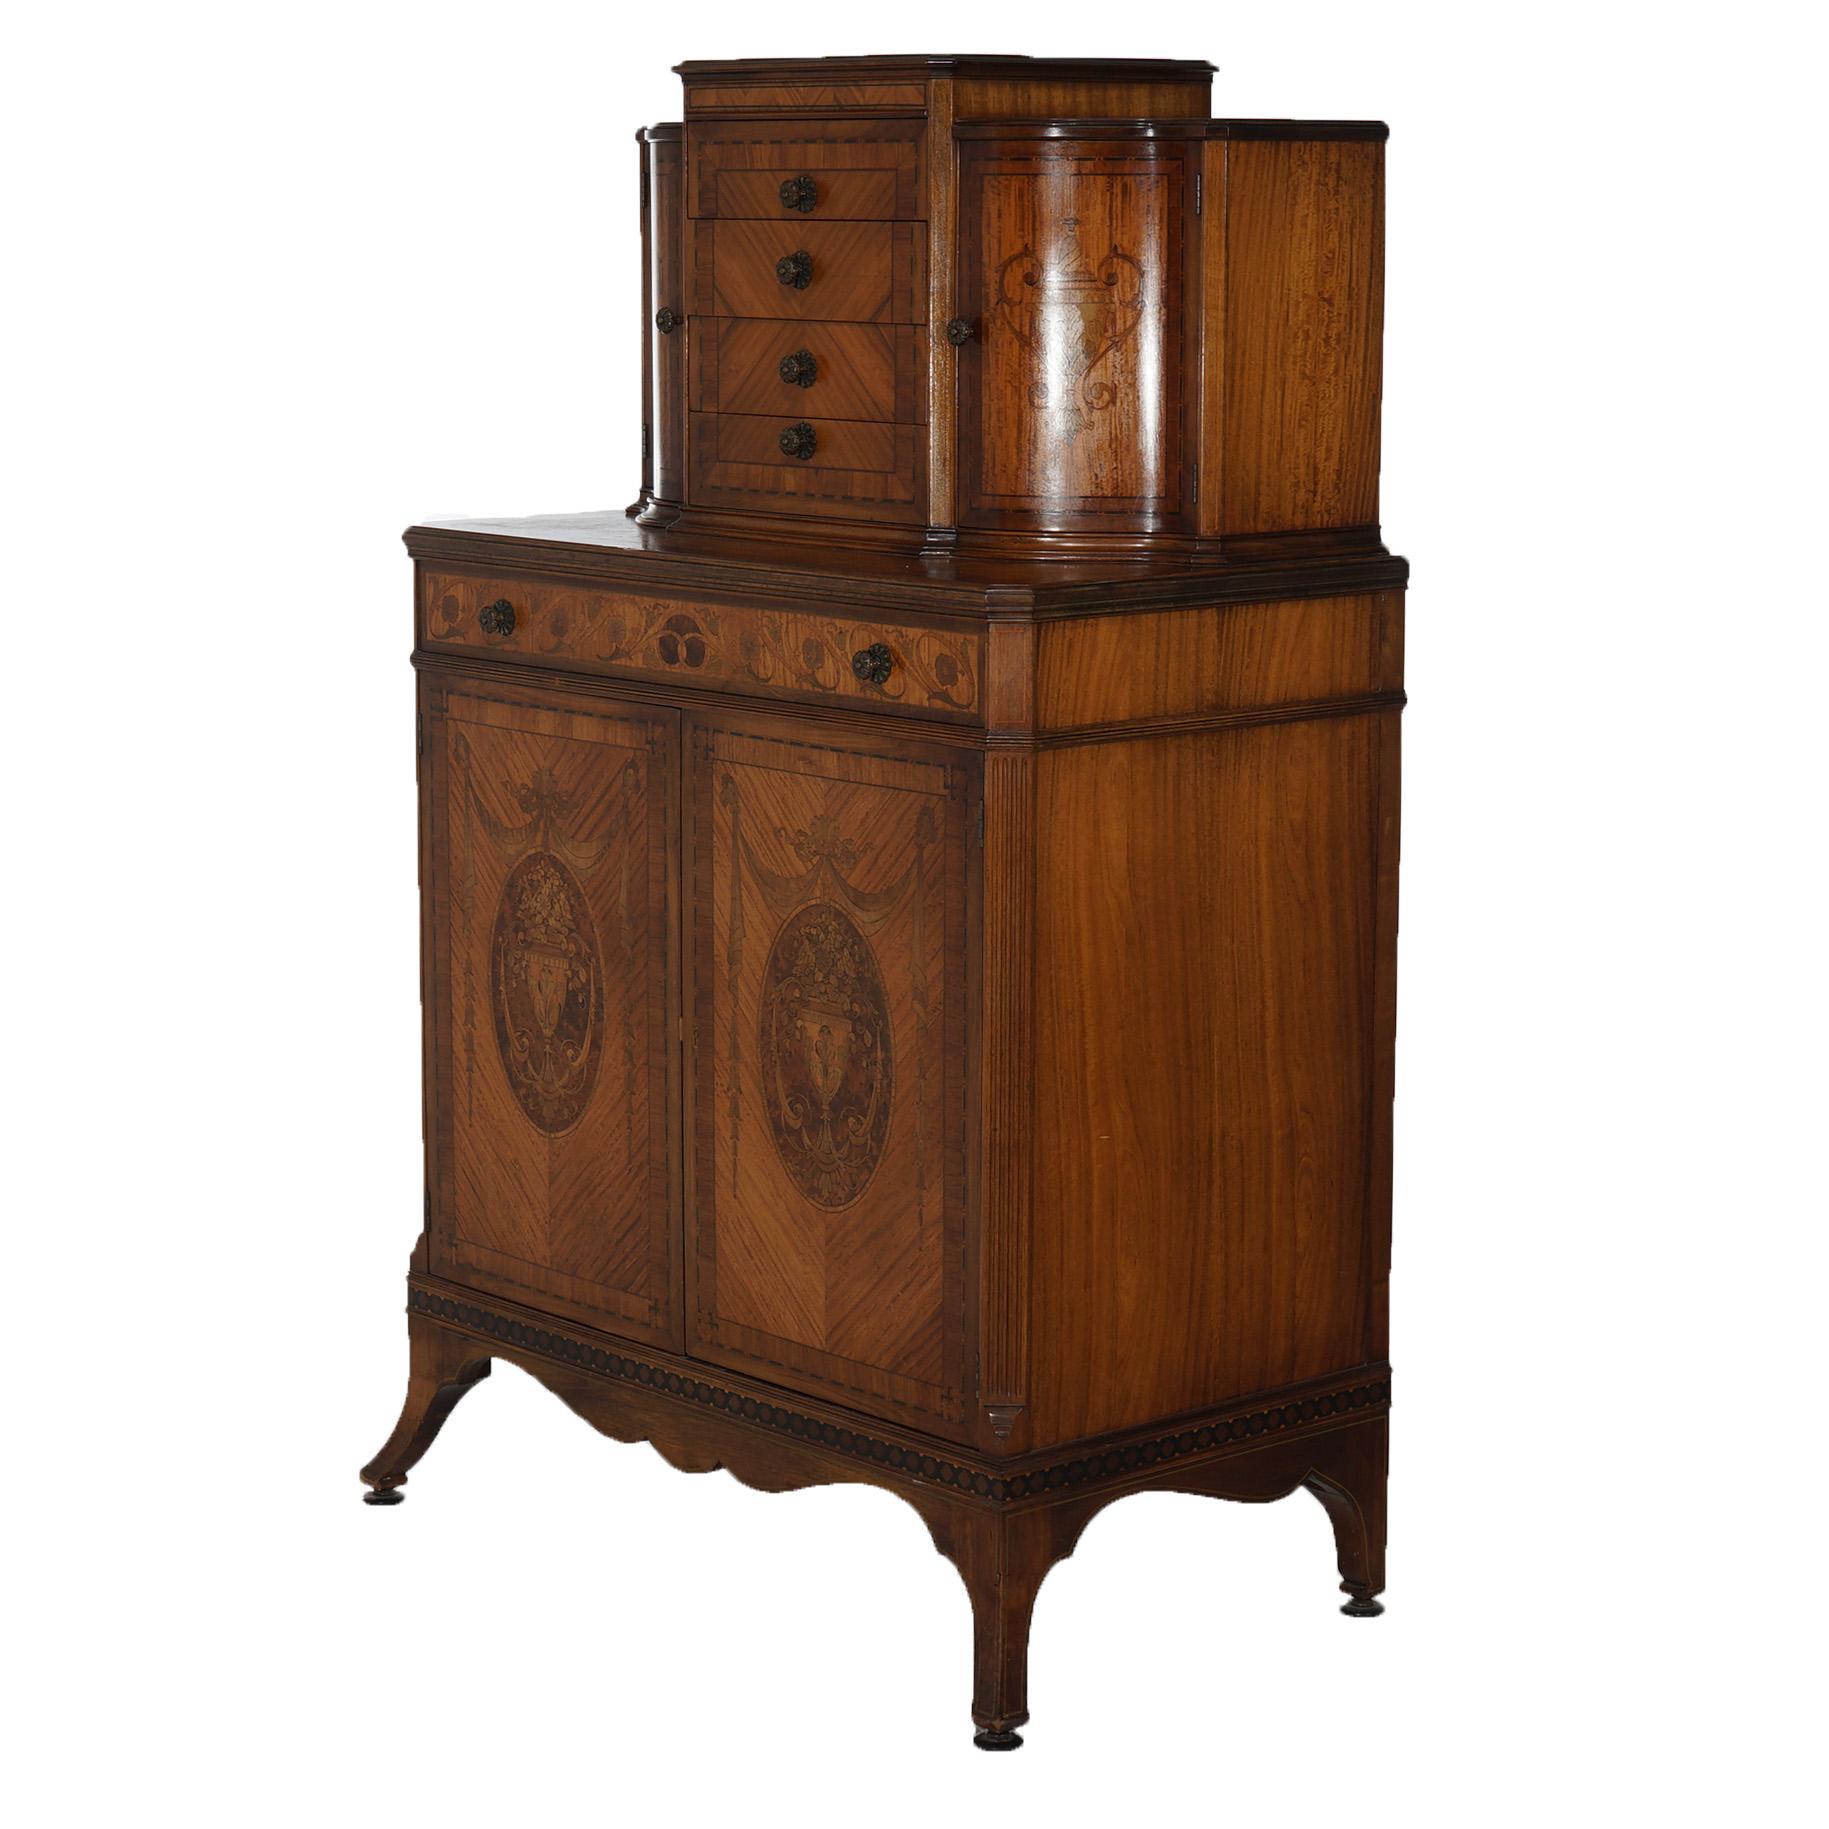 Antique Johnson Furniture Co. Satinwood & Mahogany Marquetry Chifferobe Dresser In Good Condition For Sale In Big Flats, NY